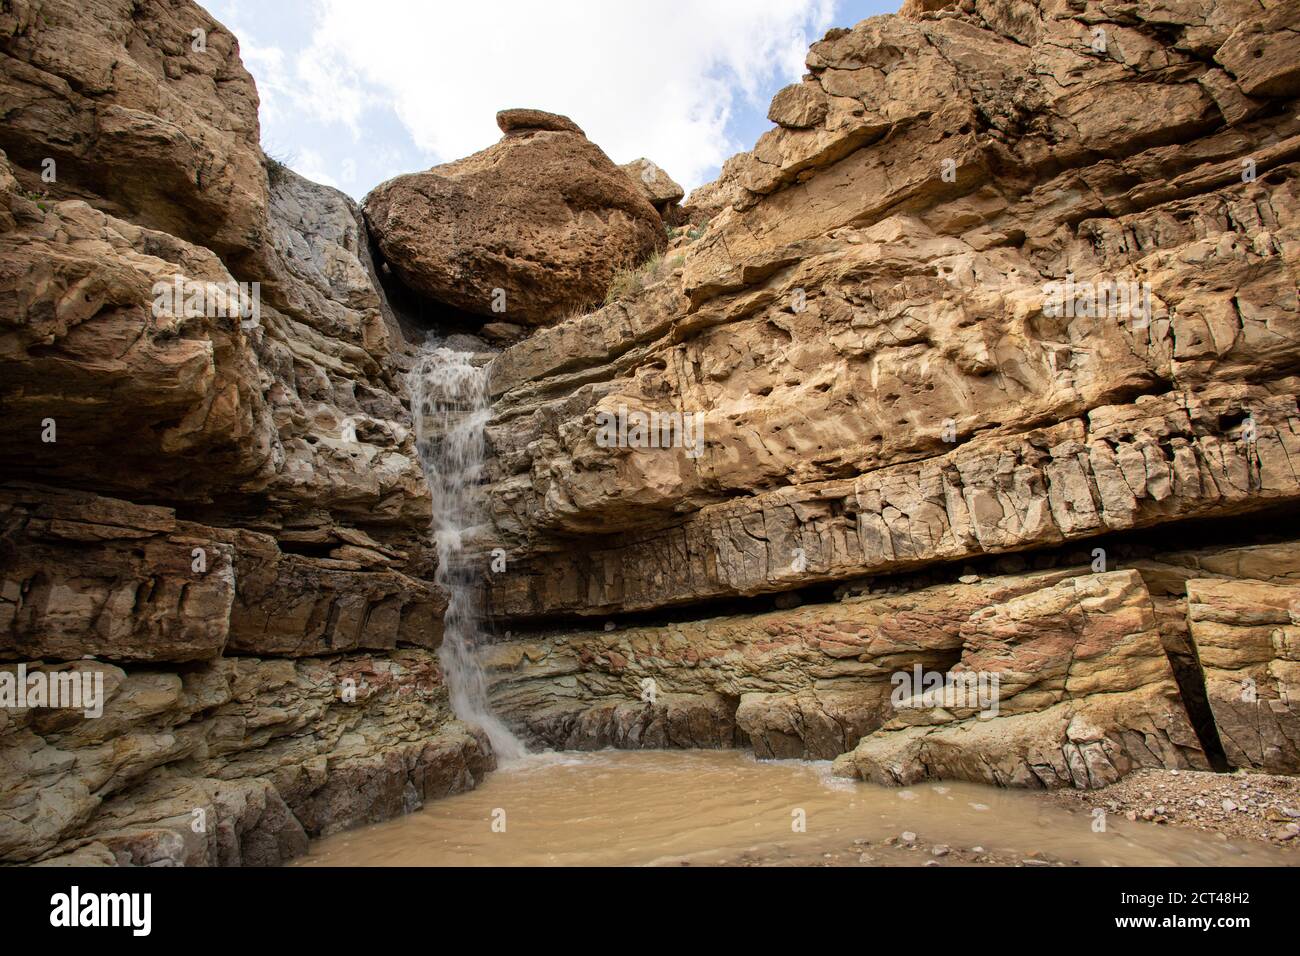 Ein Gedi national park. The Hidden Waterfall in Wadi Arugot [Arugot Stream]. The Arugot Stream is one of the only two streams at the center of the Jud Stock Photo